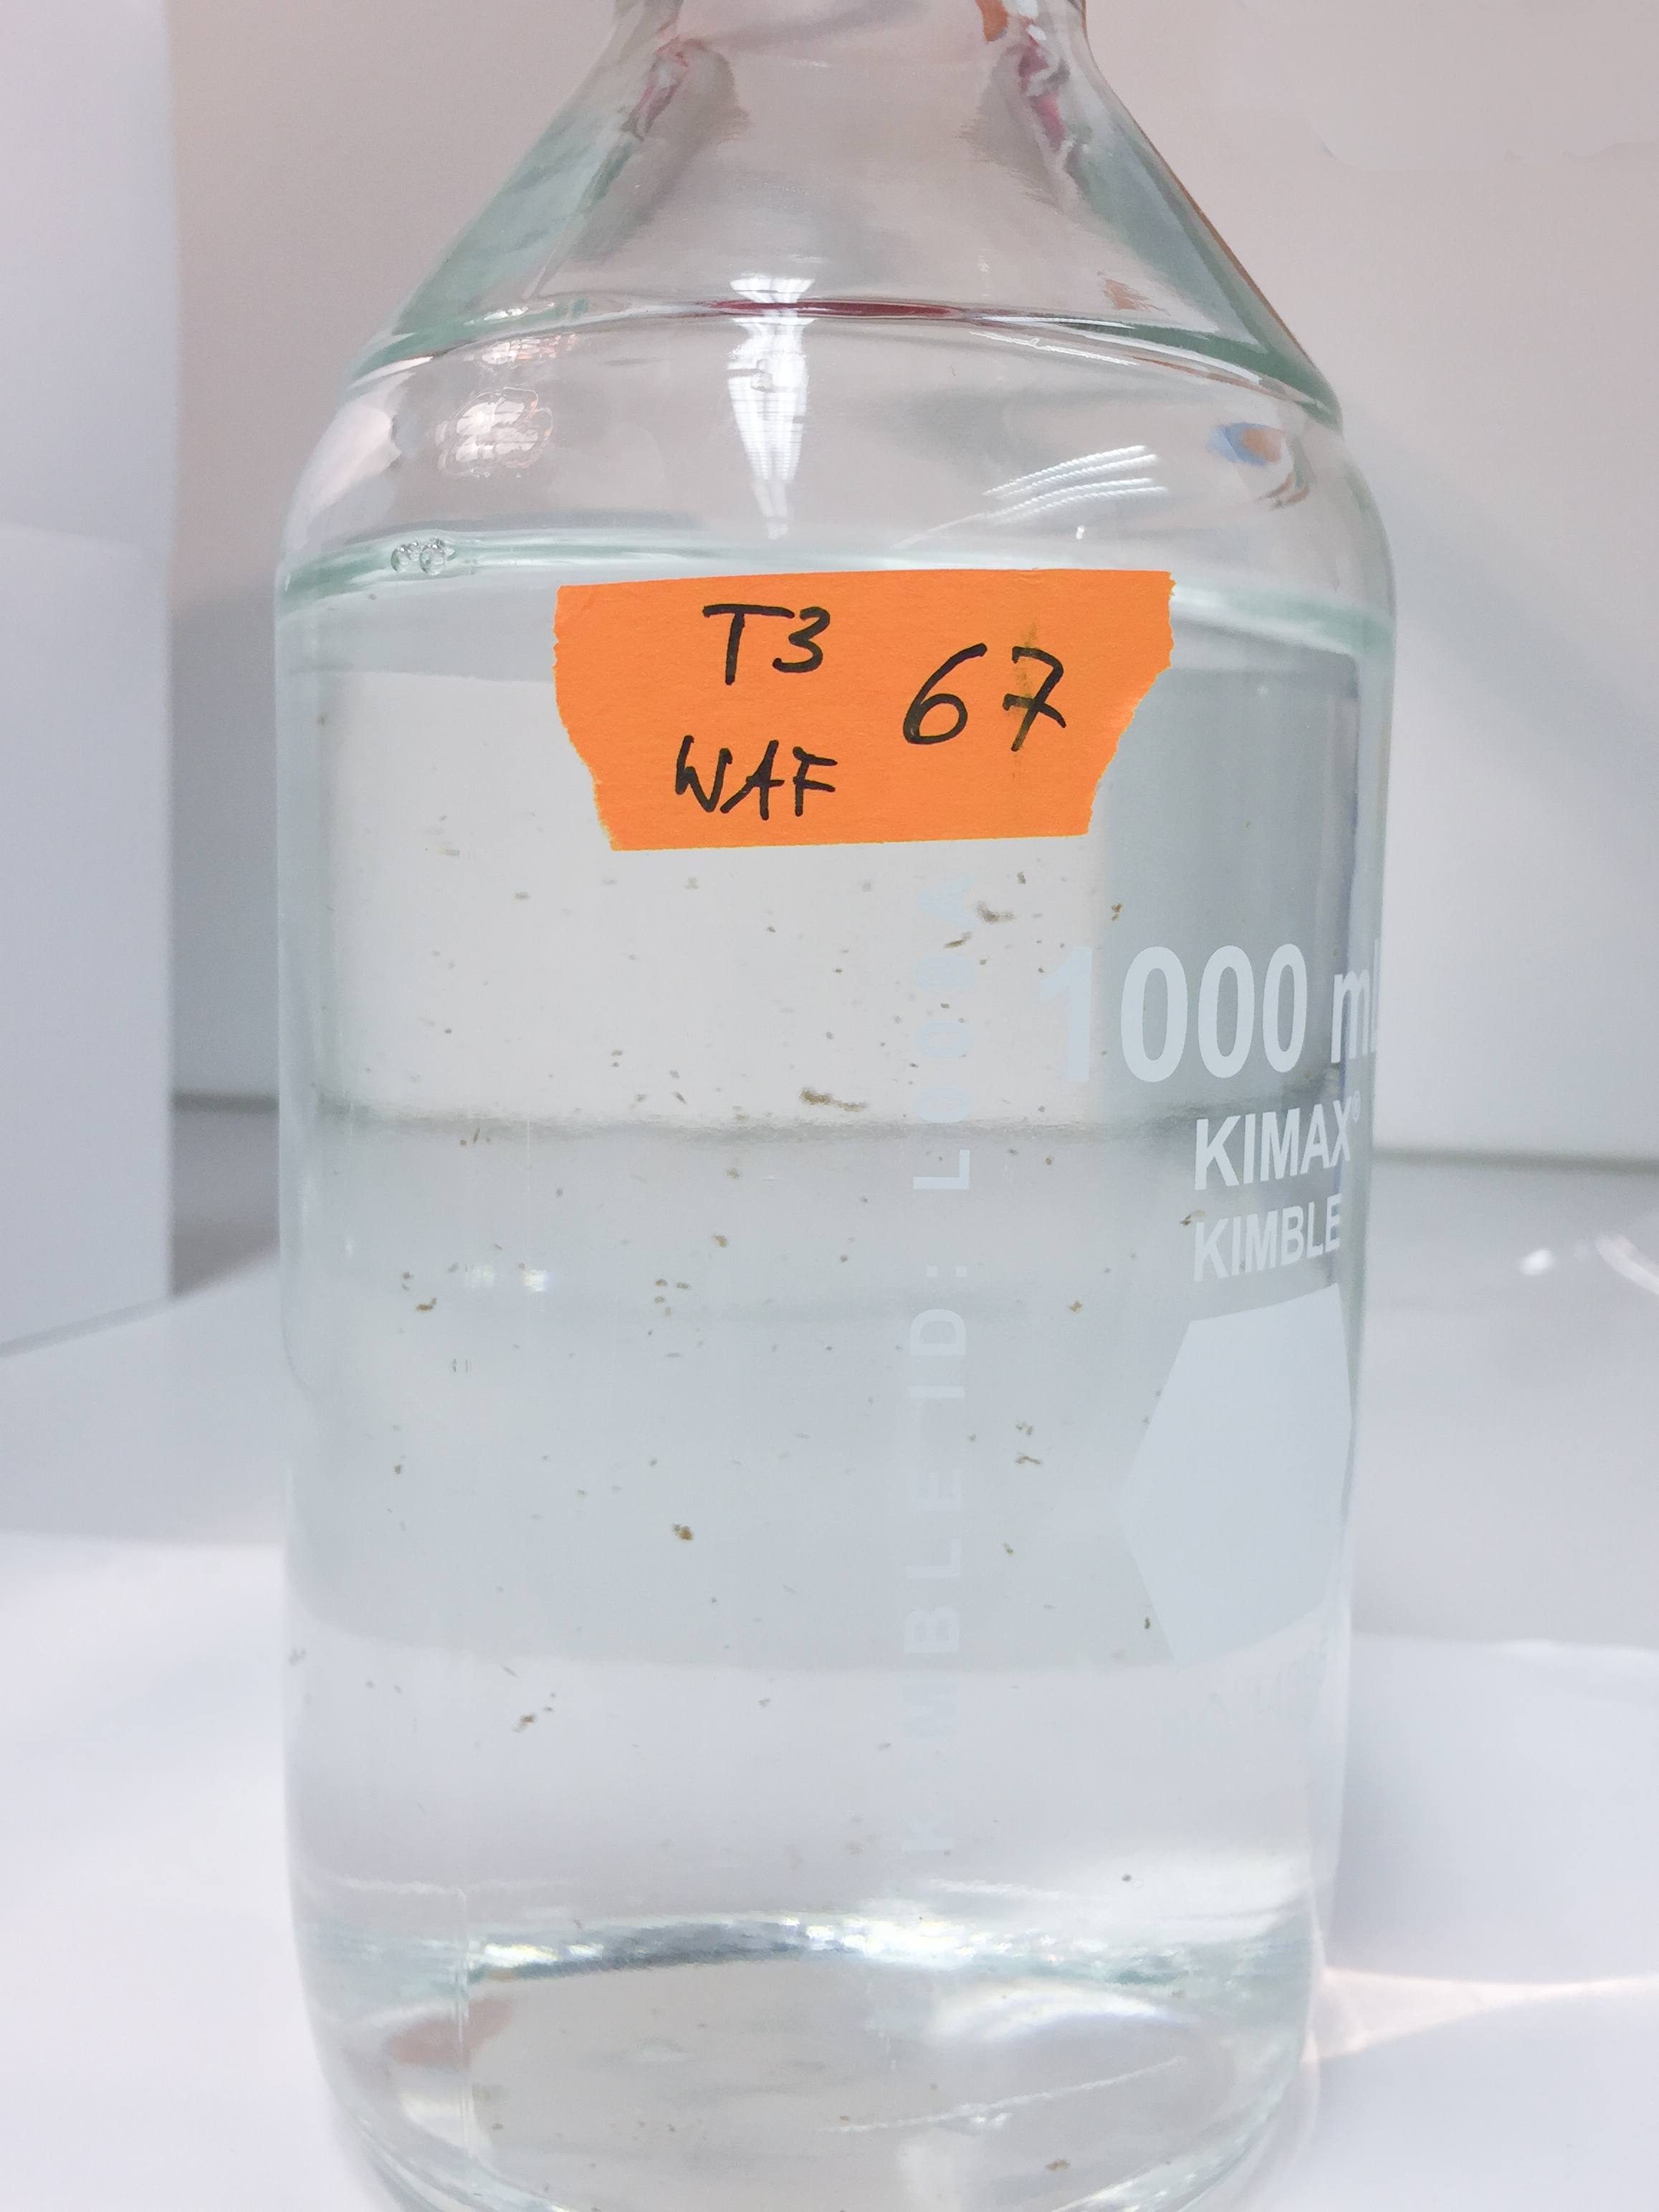 1-litre laboratory glass bottle with a clear liquid showing a few small, light brown flakes. The bottle is labelled with a number and letters.